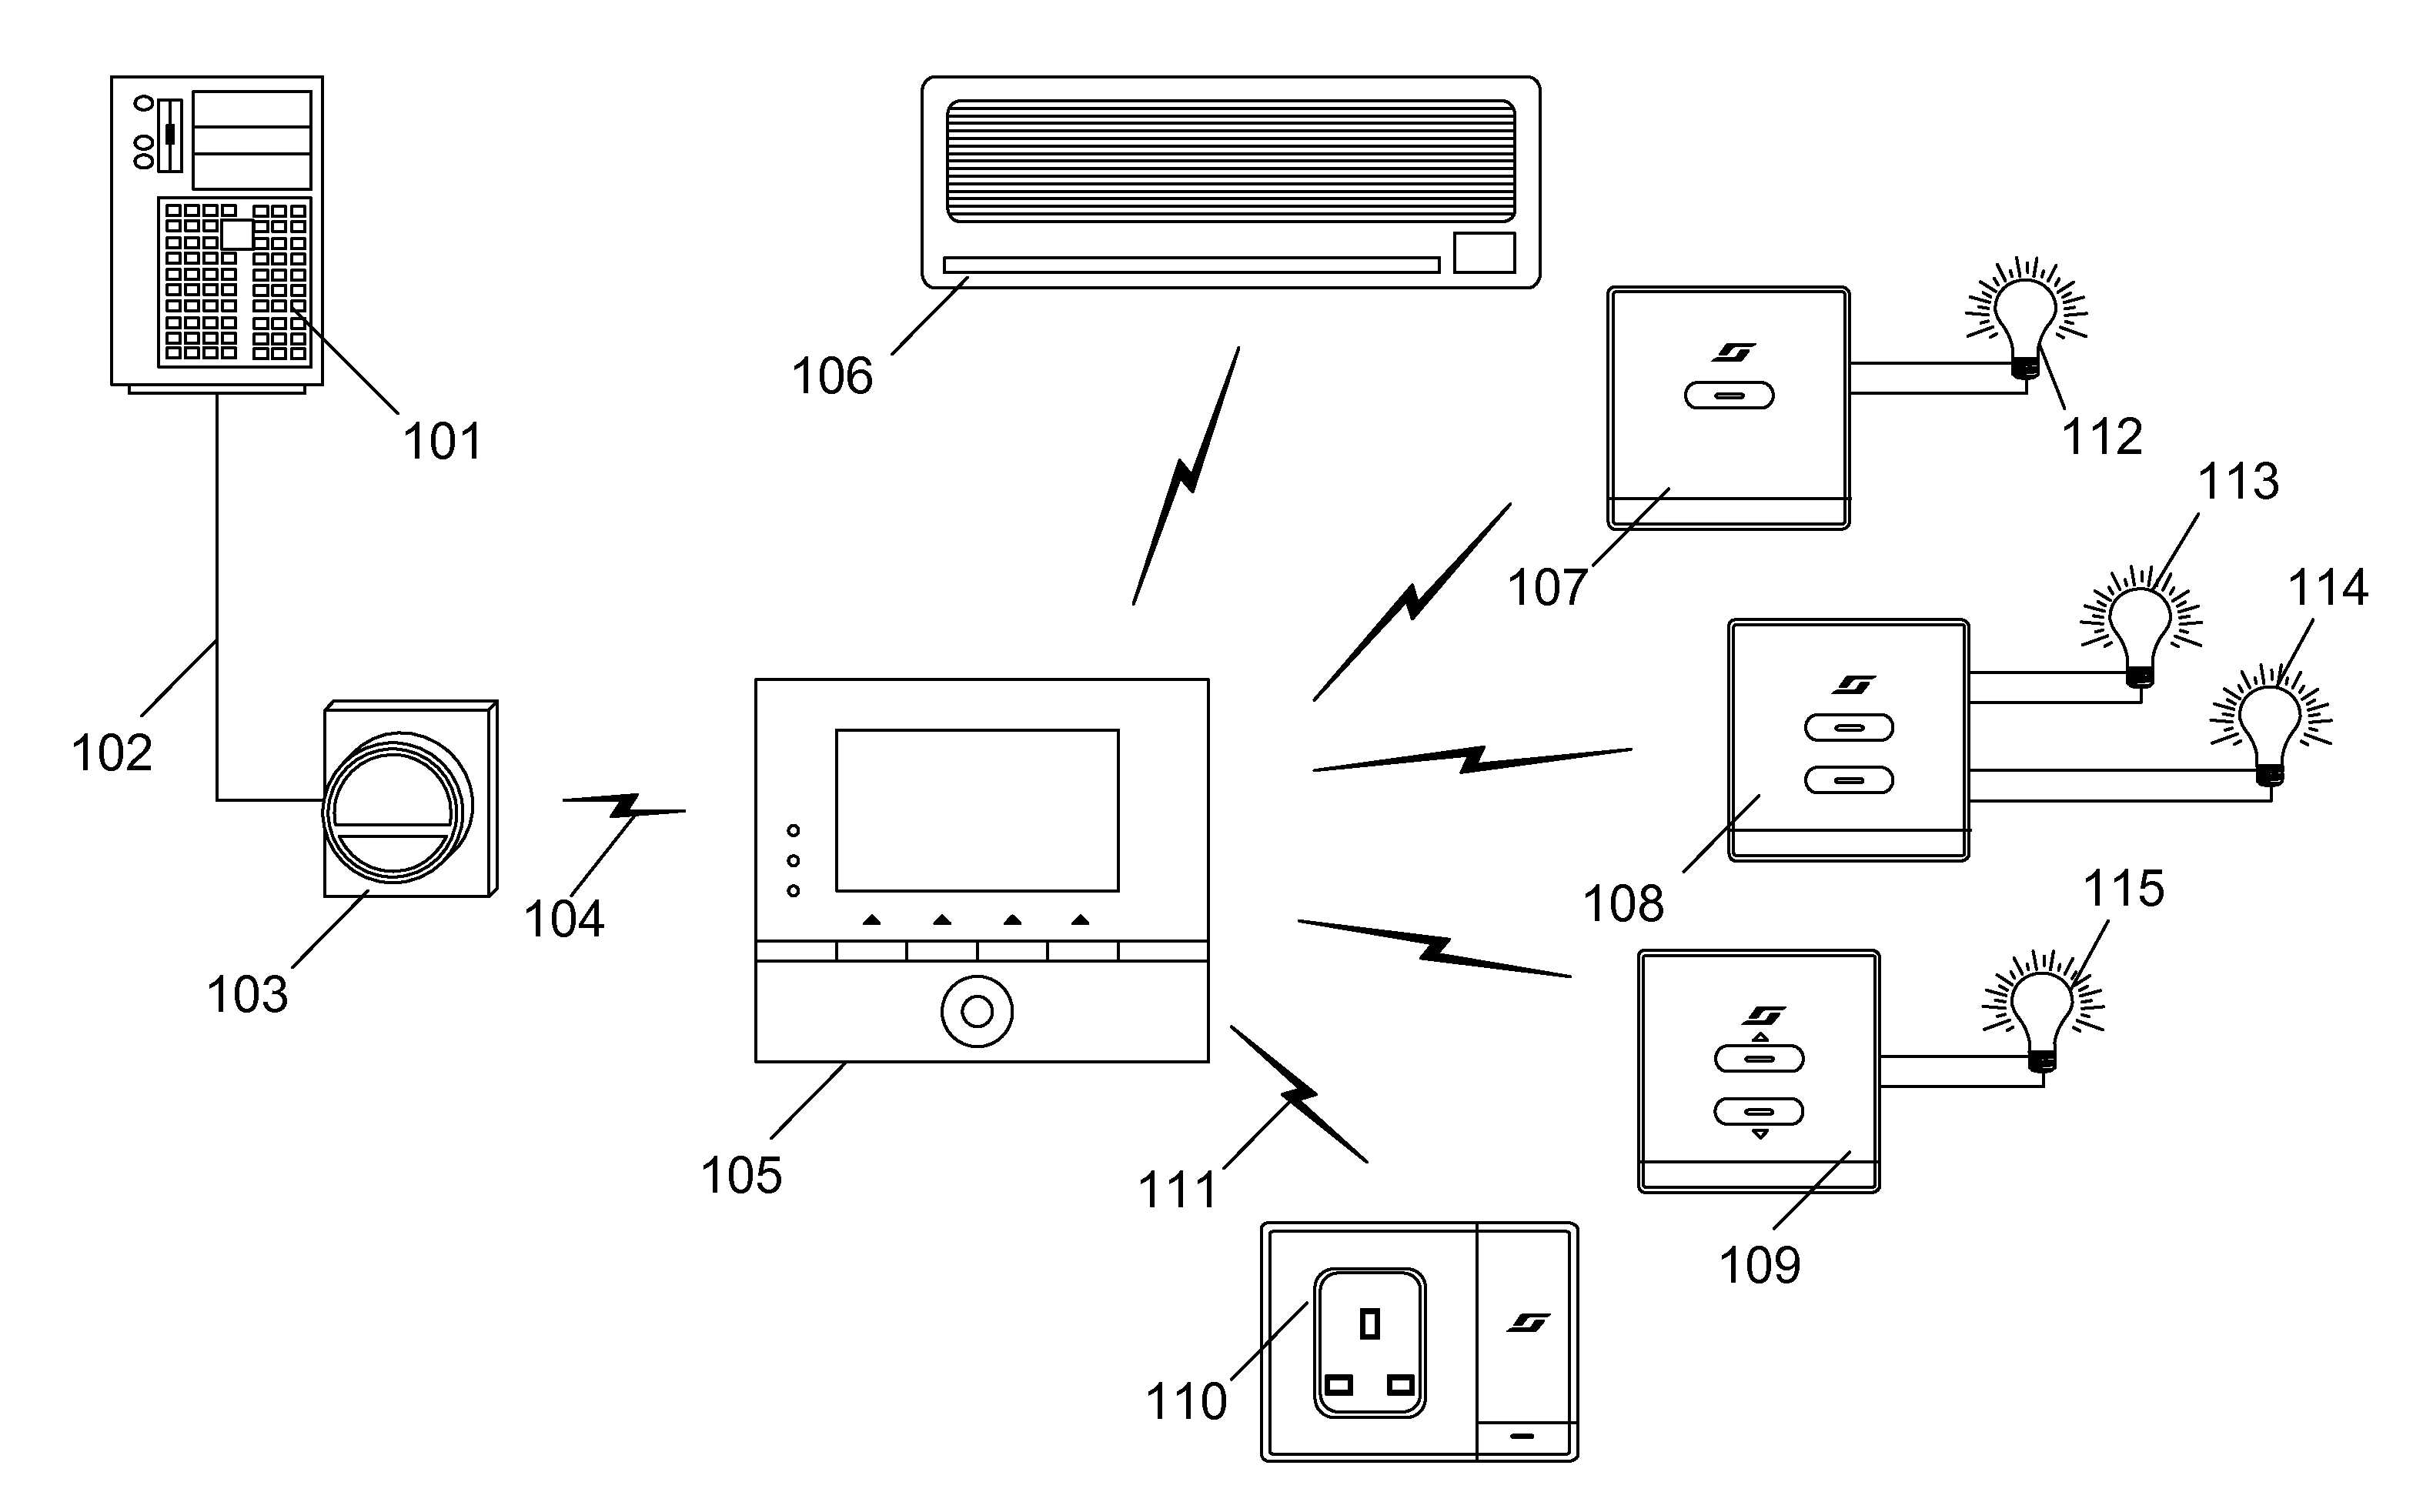 Apparatus and methods for energy management system